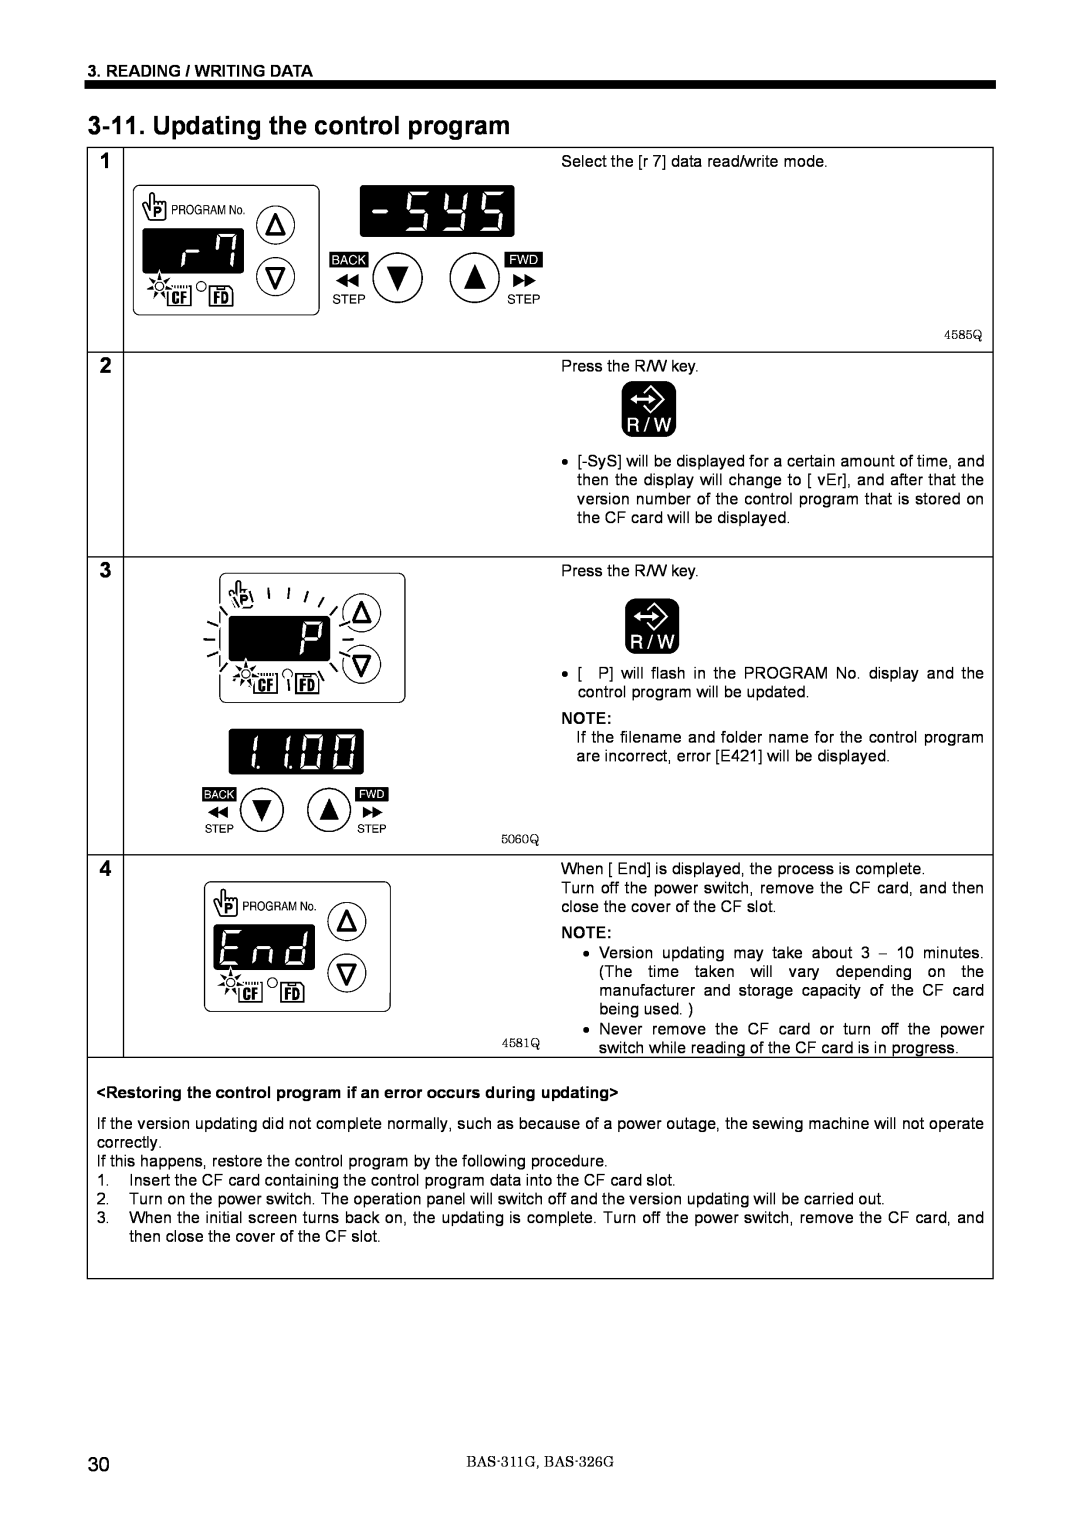 Brother BAS-311G service manual Updating the control program, Reading / Writing Data 